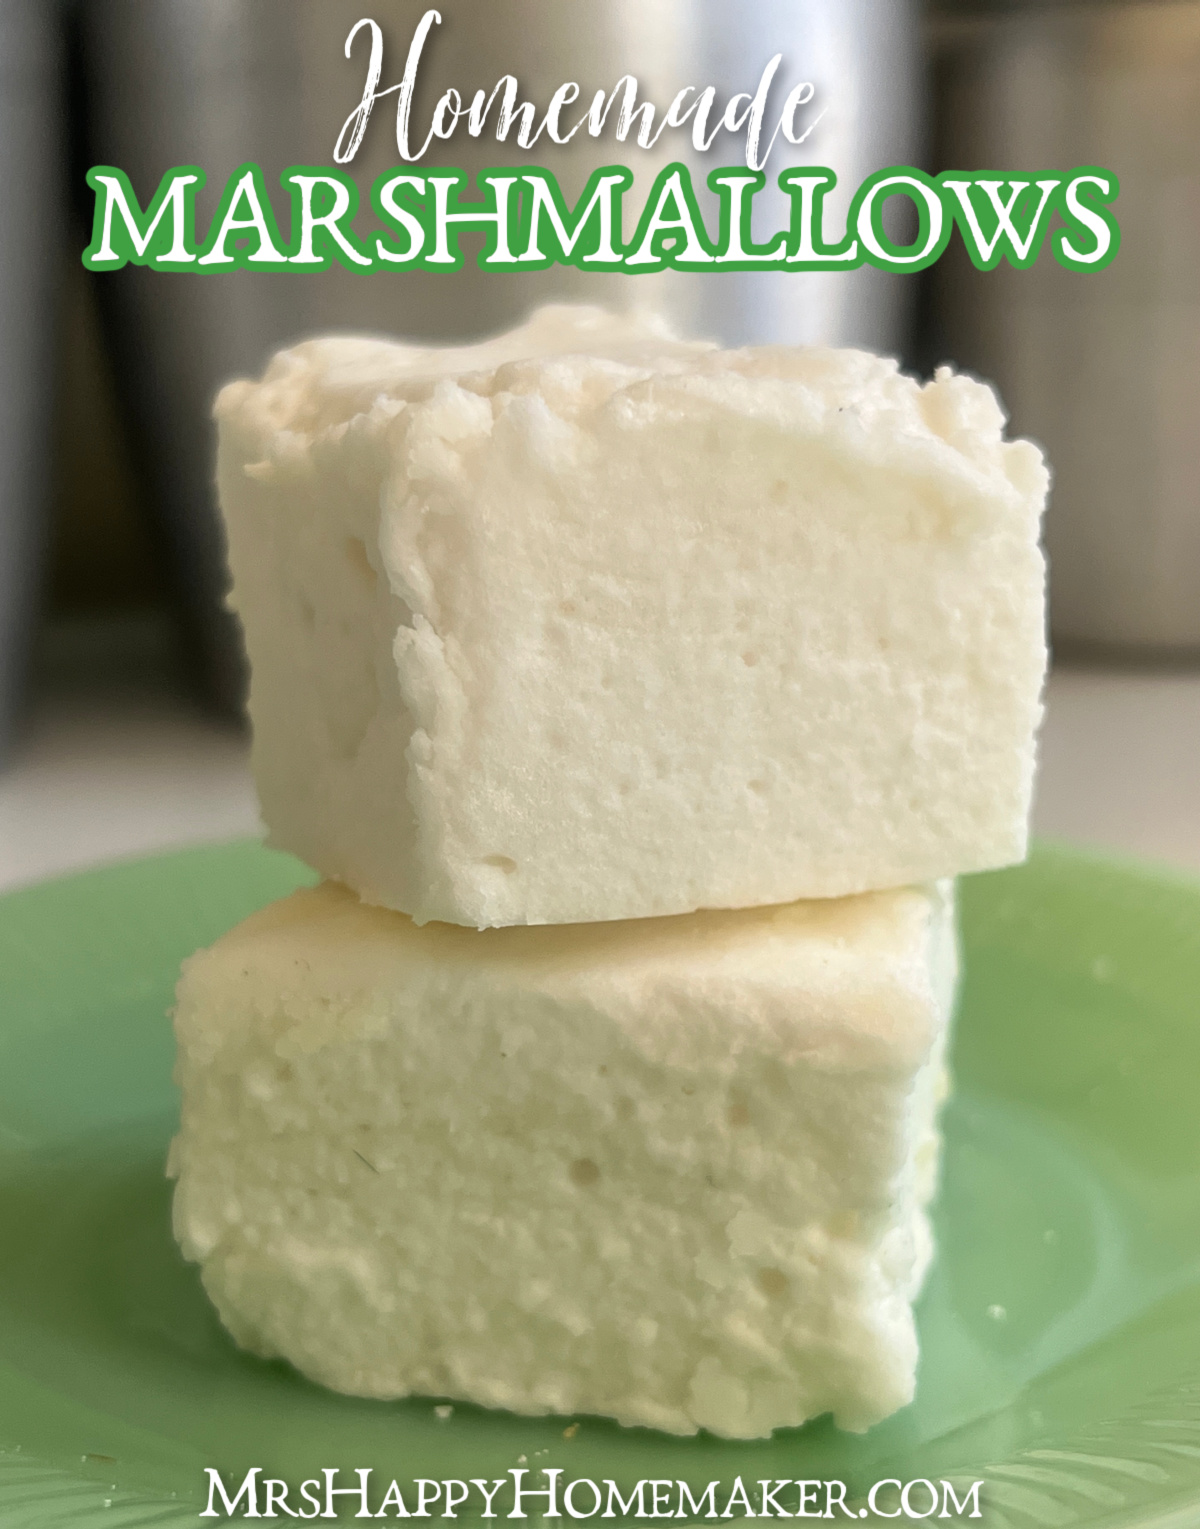 Two homemade marshmallows stacked on top of each other sitting on a green jadeite plate with a silver canister behind them